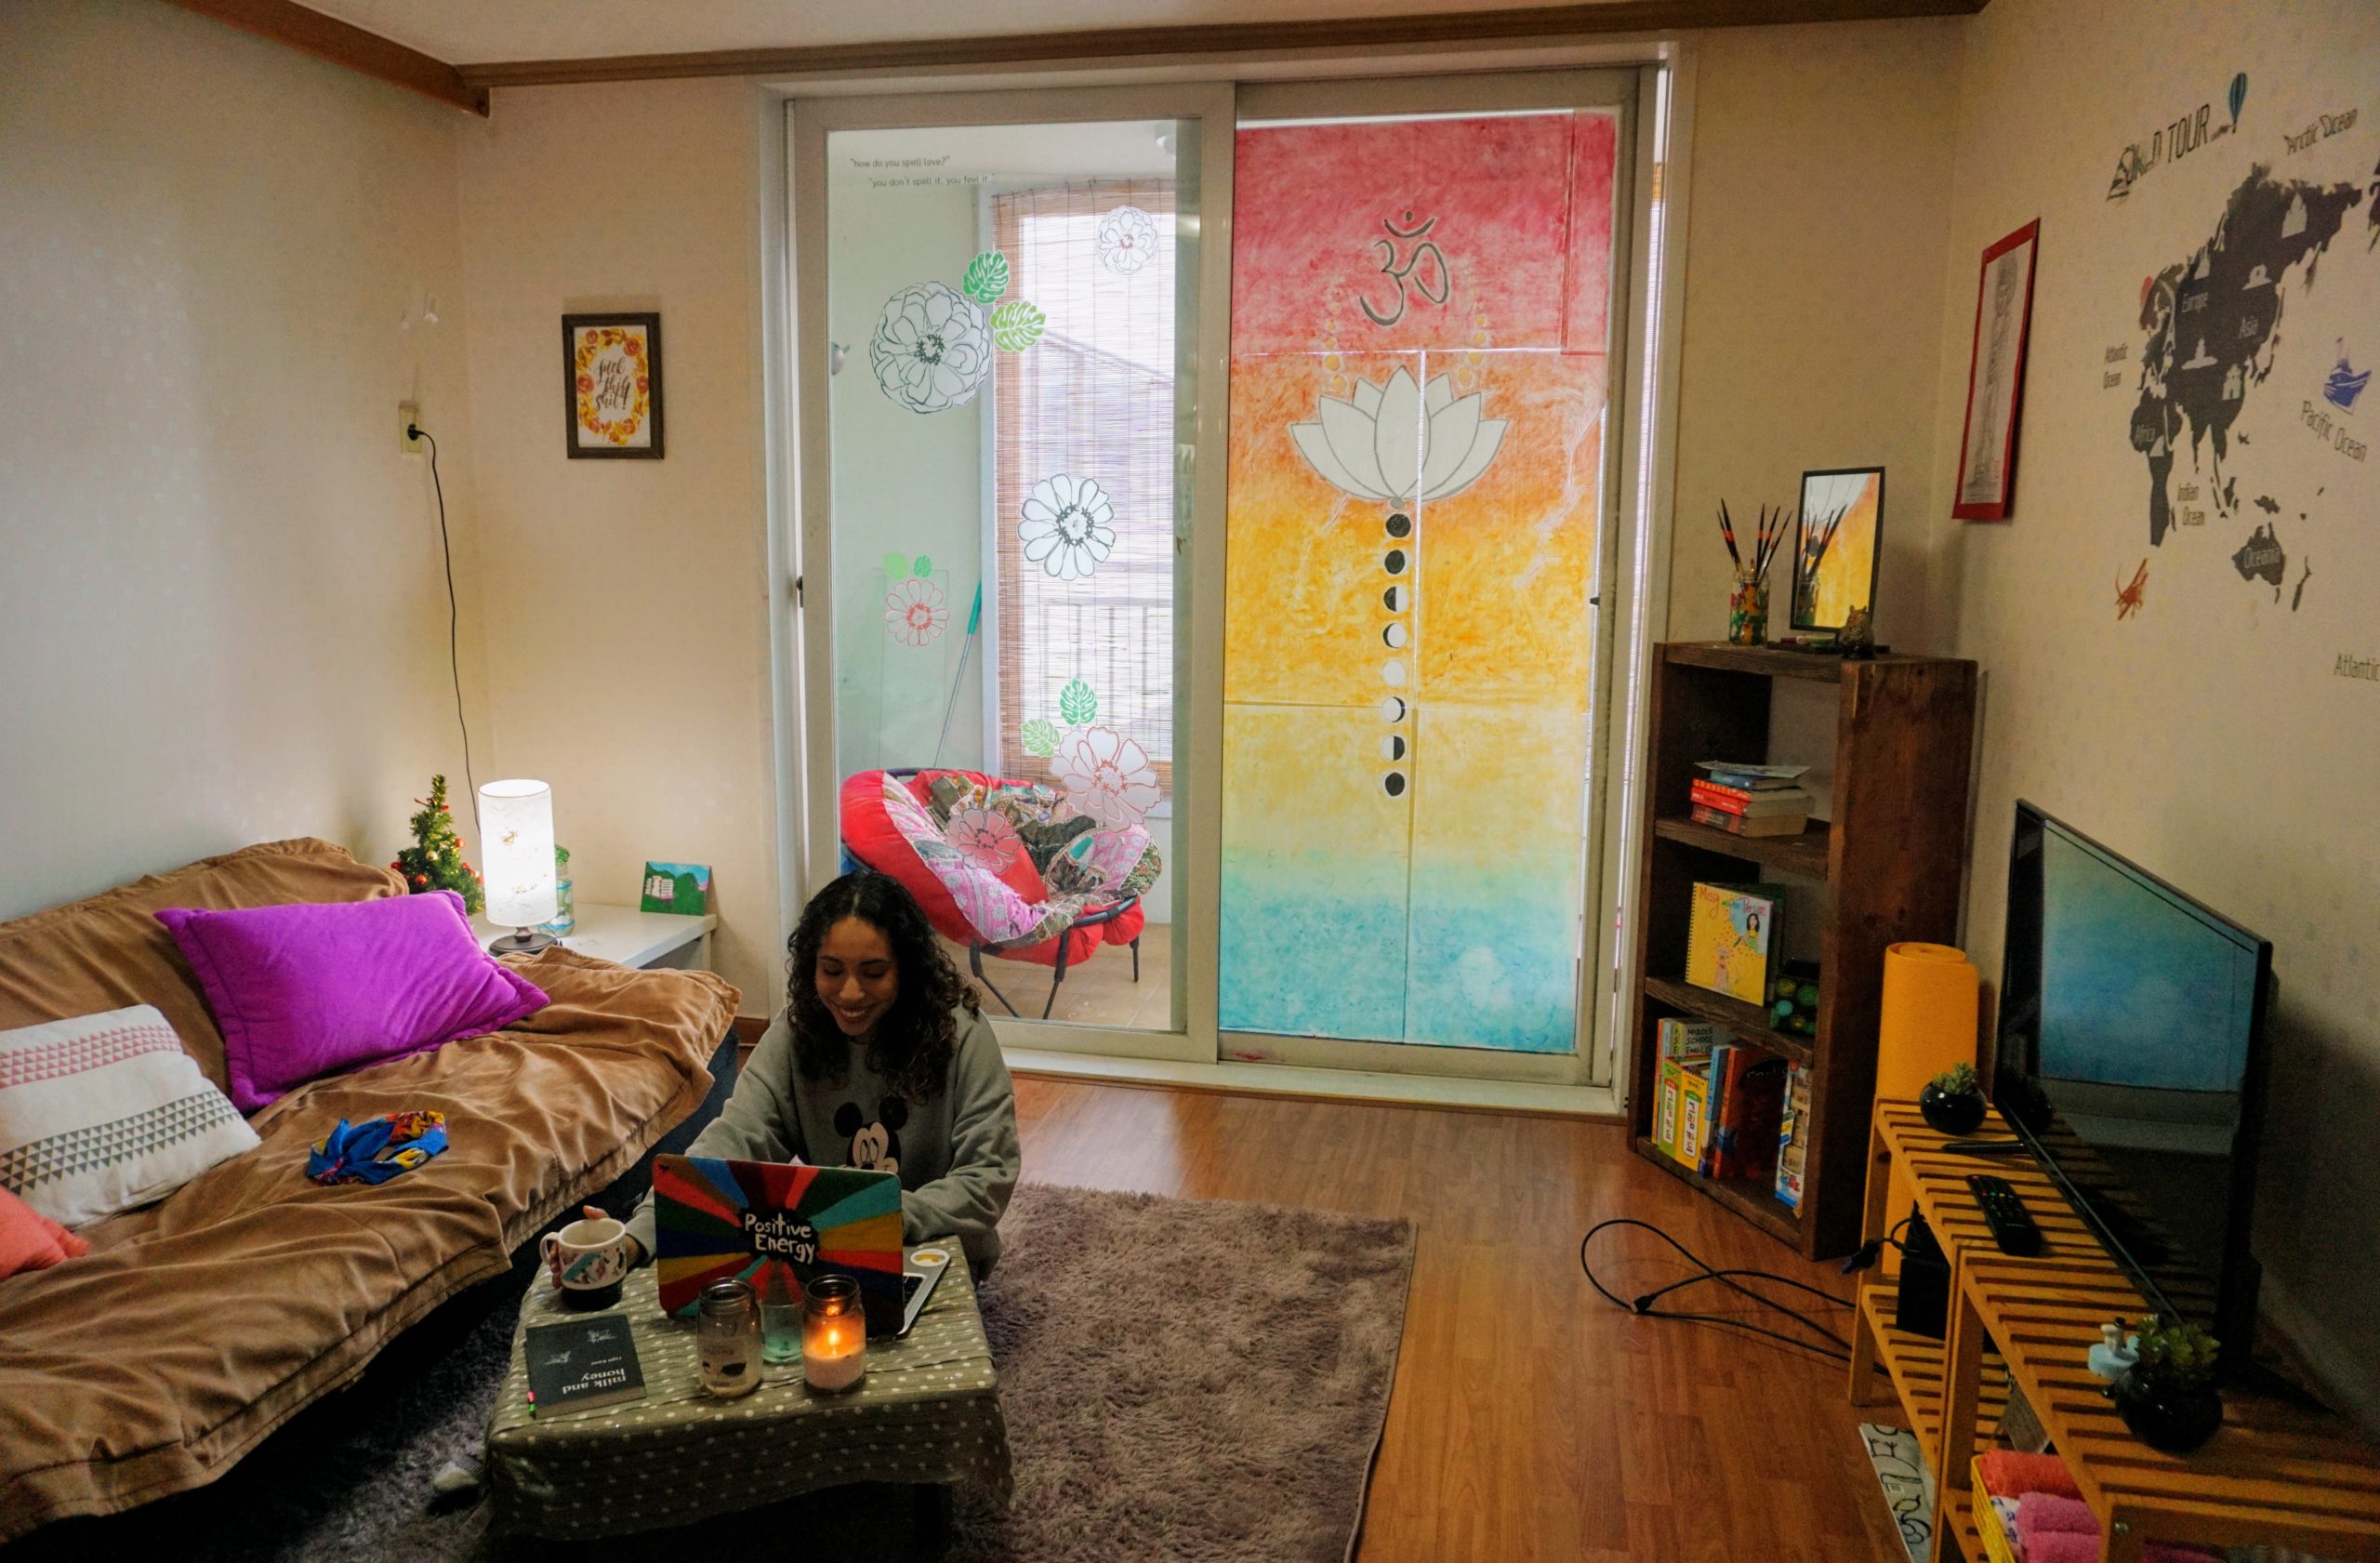 Natalie pictured at the center of the image in her first apartment in Imsil, South Korea.